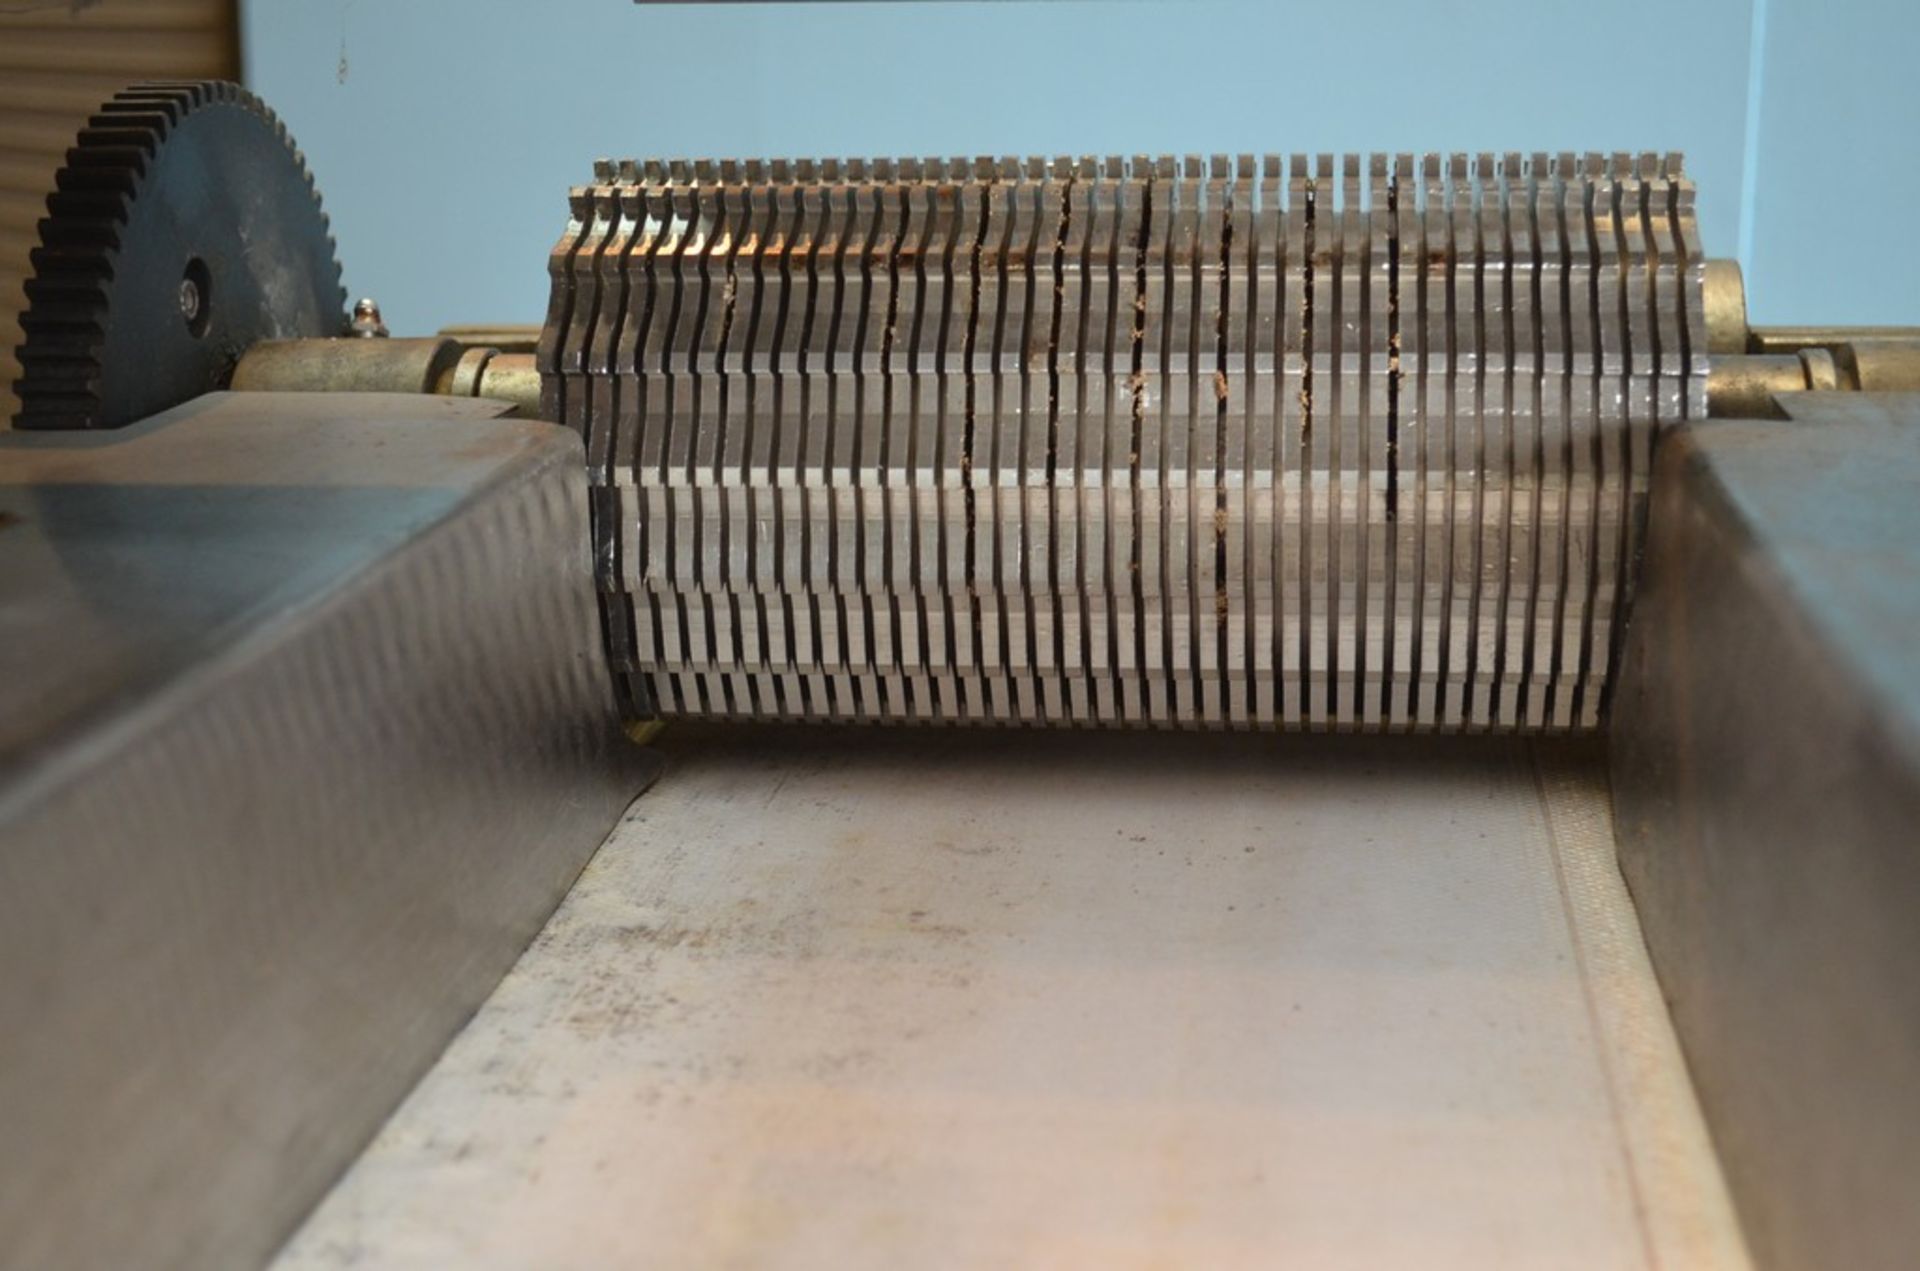 Urschel Laboratories J9A S/S Belt Fed Dicer, Strip Cutter. Circular Knife Cuts From 3/16 in to 3 in. - Image 7 of 16